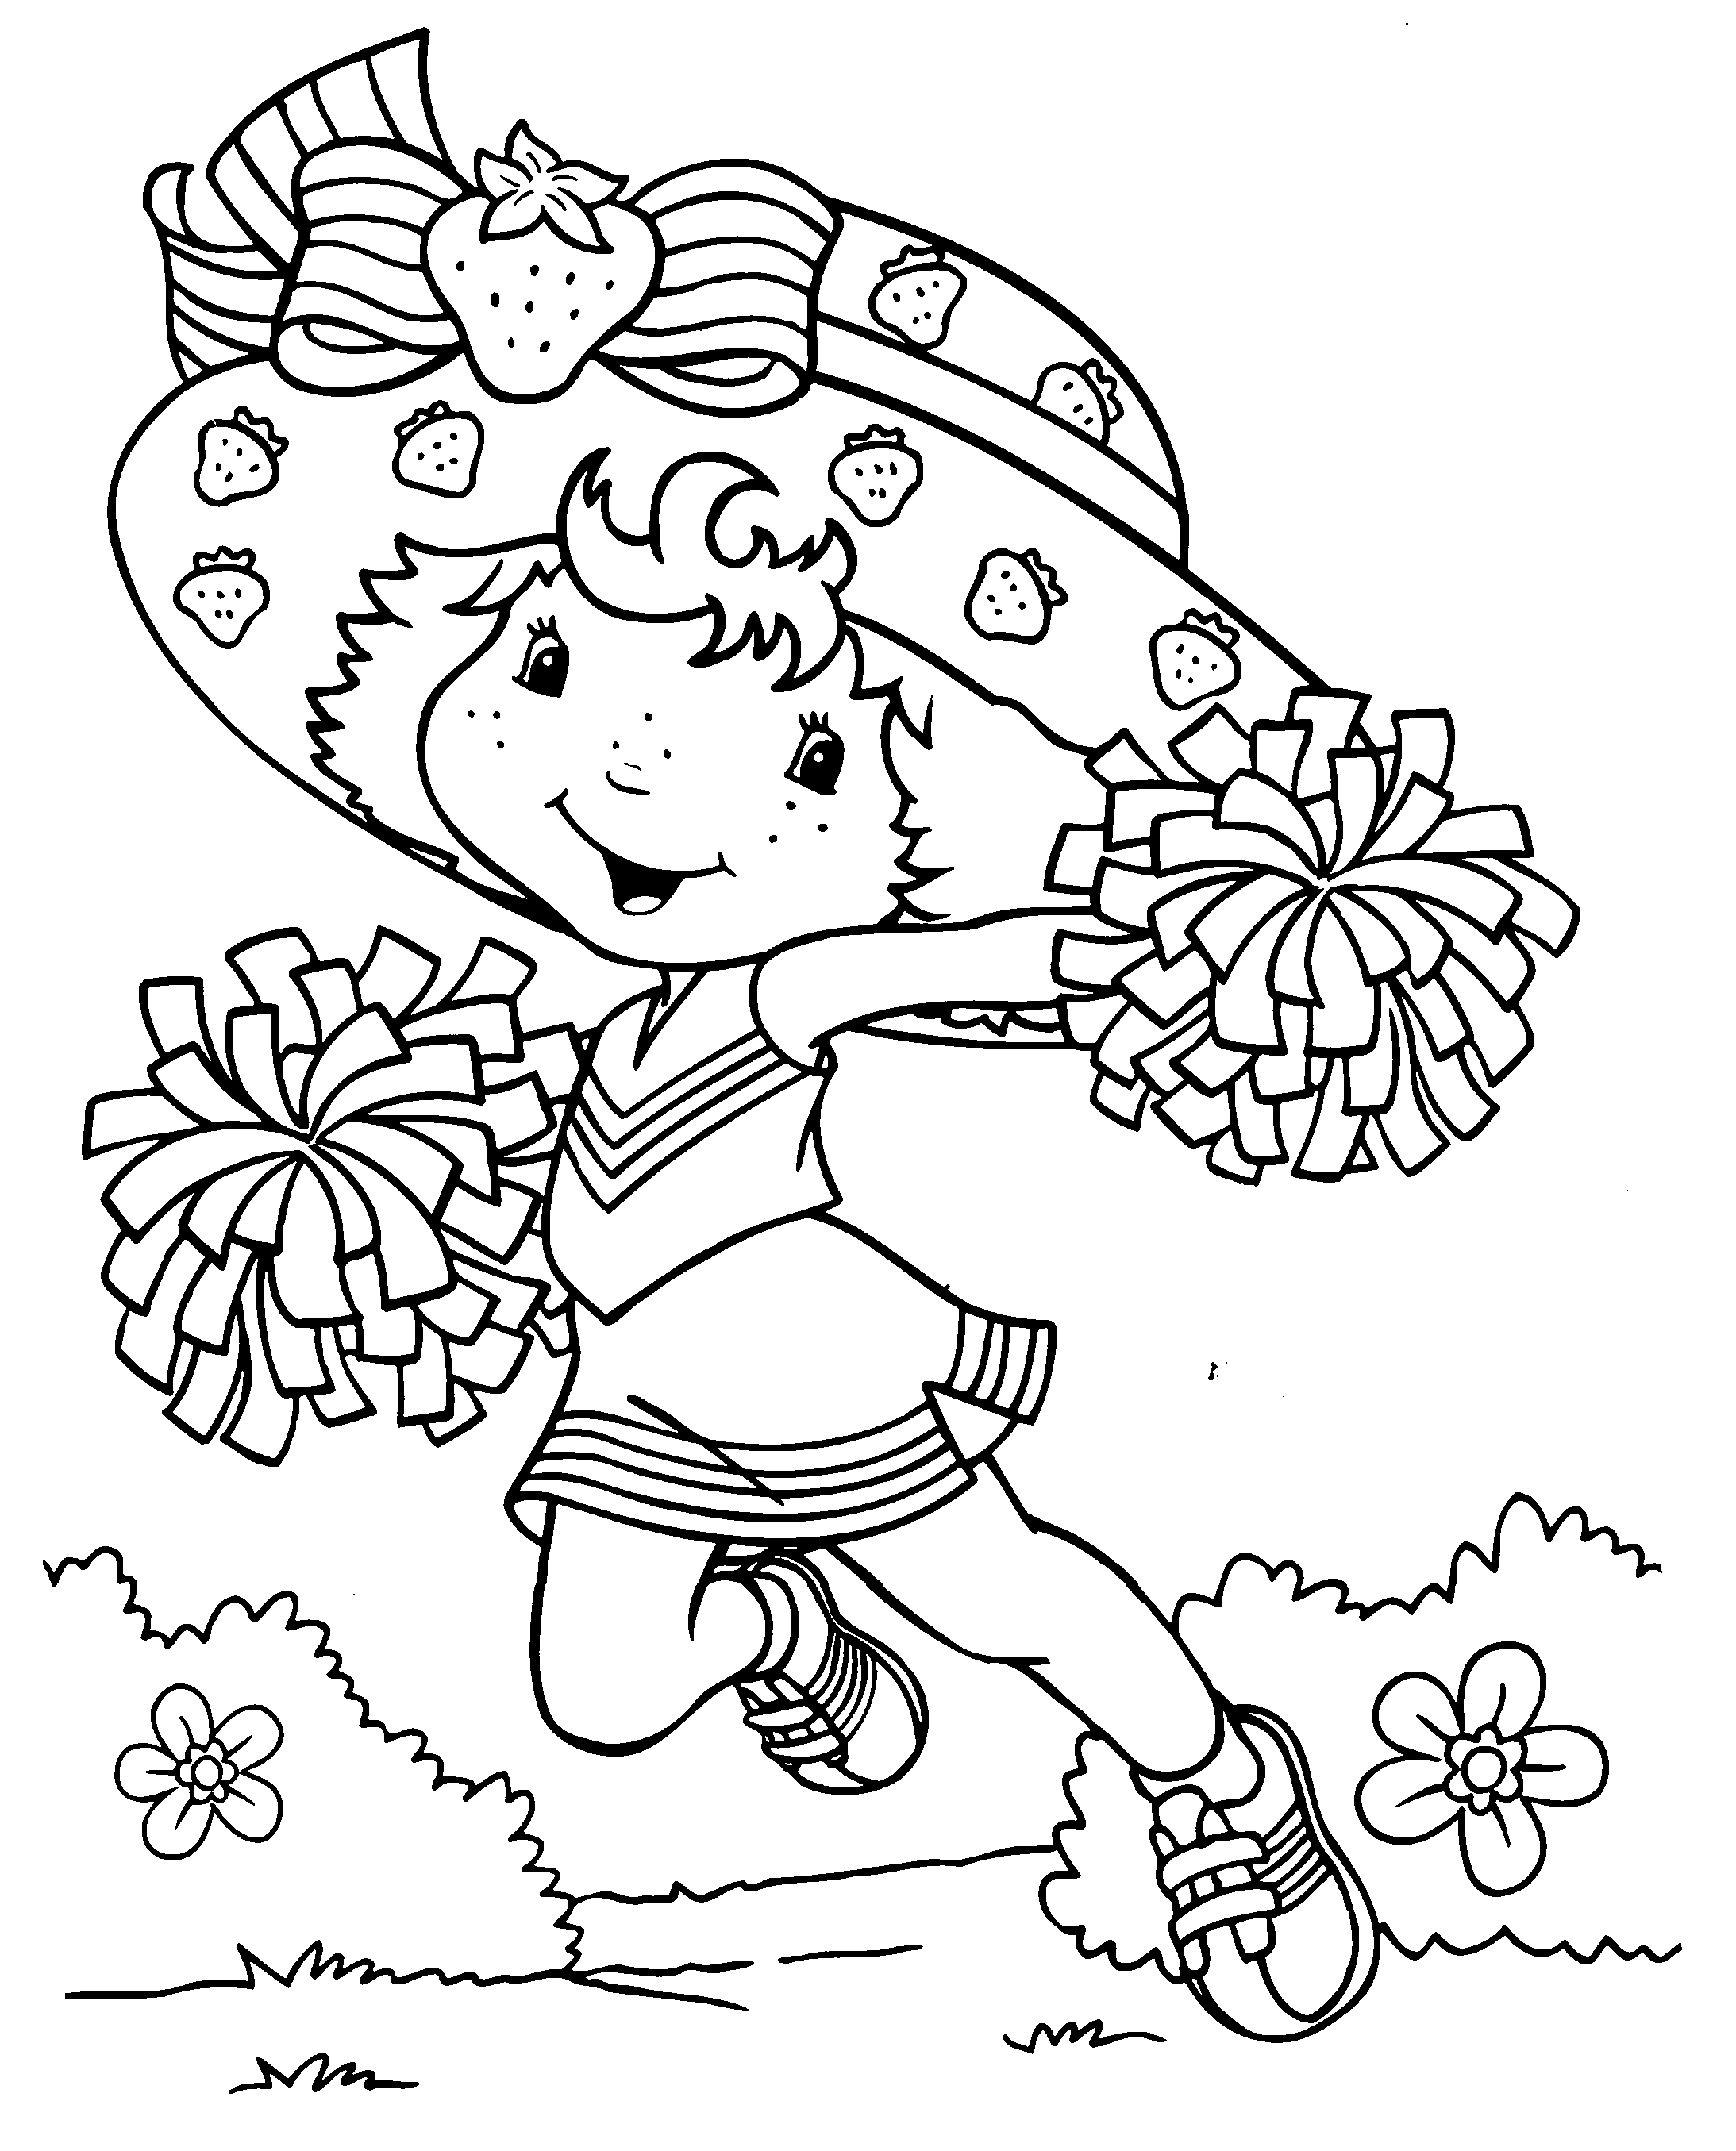 coloring page of a girl